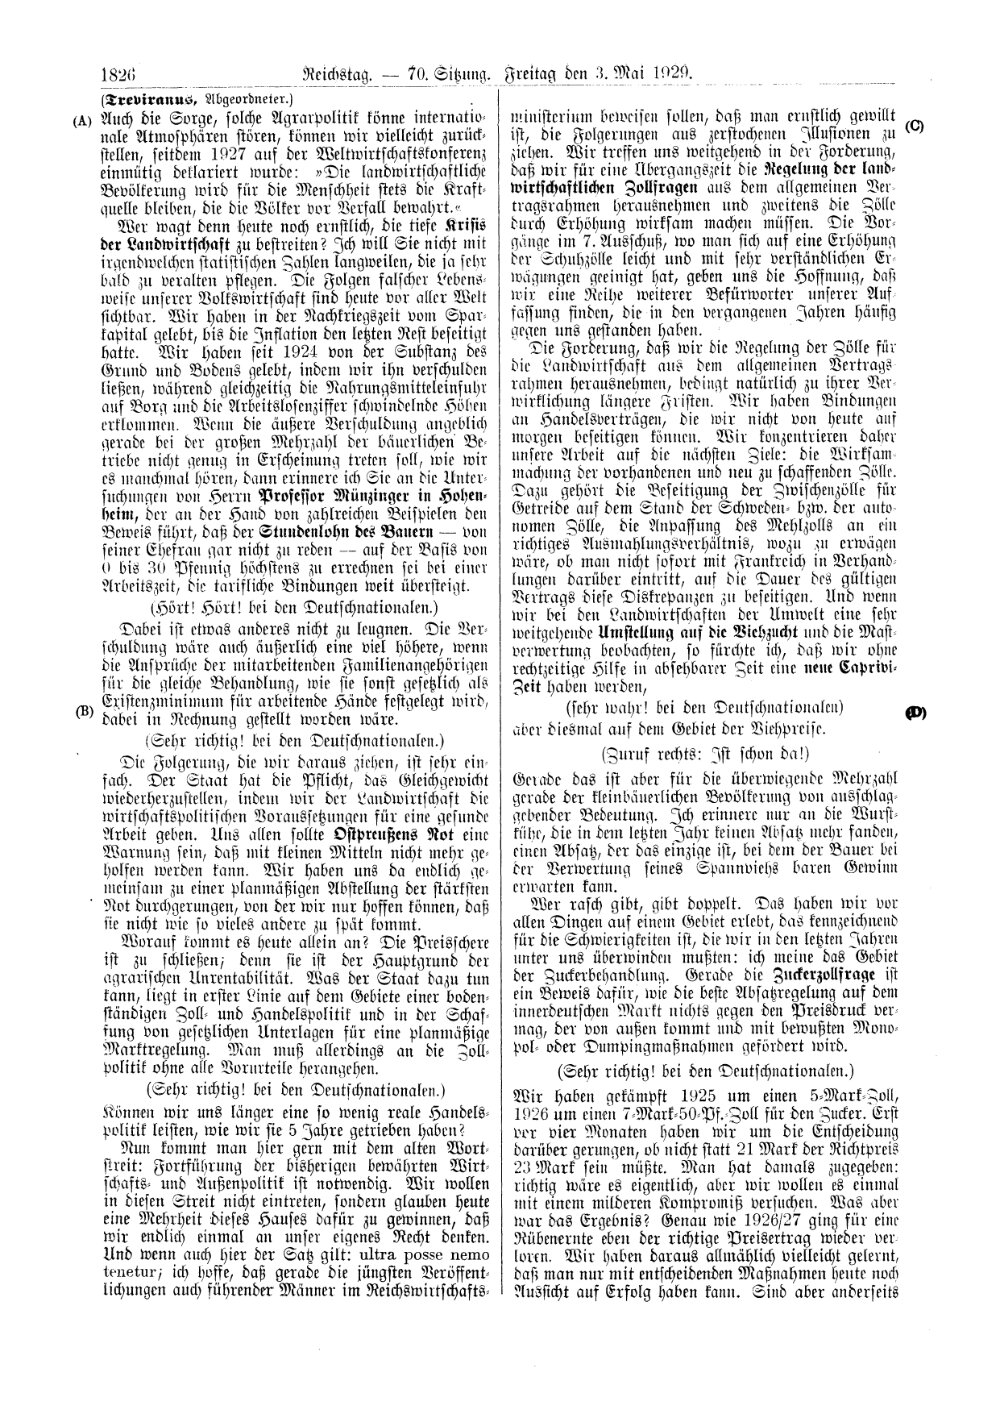 Scan of page 1826